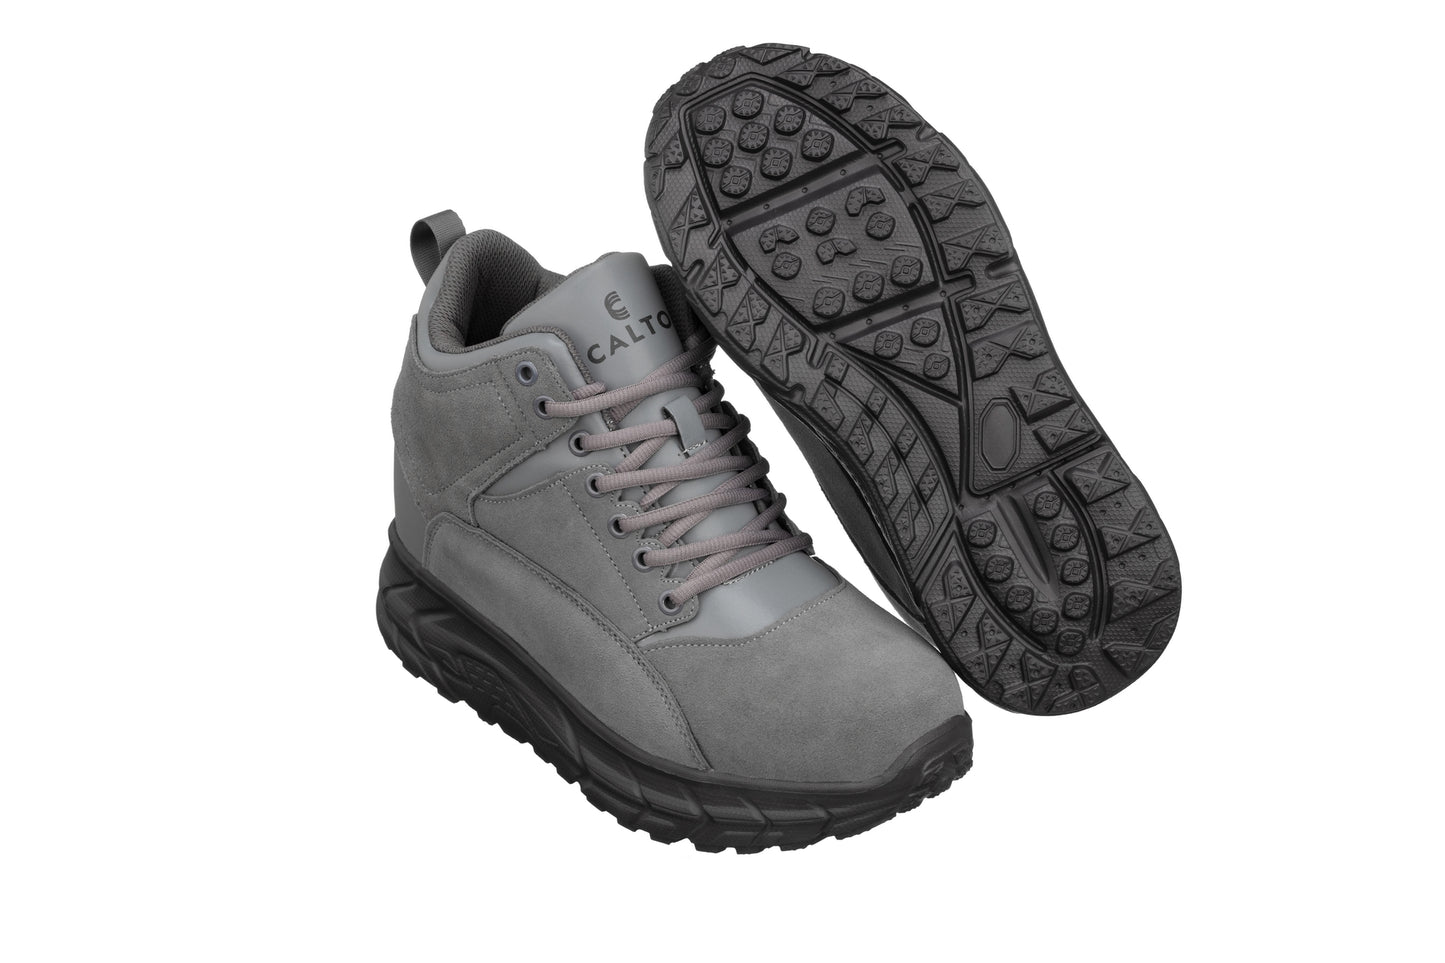 Elevator shoes height increase CALTO - S22800 - 4 Inches Taller (Grey) - Hiking Style Boots